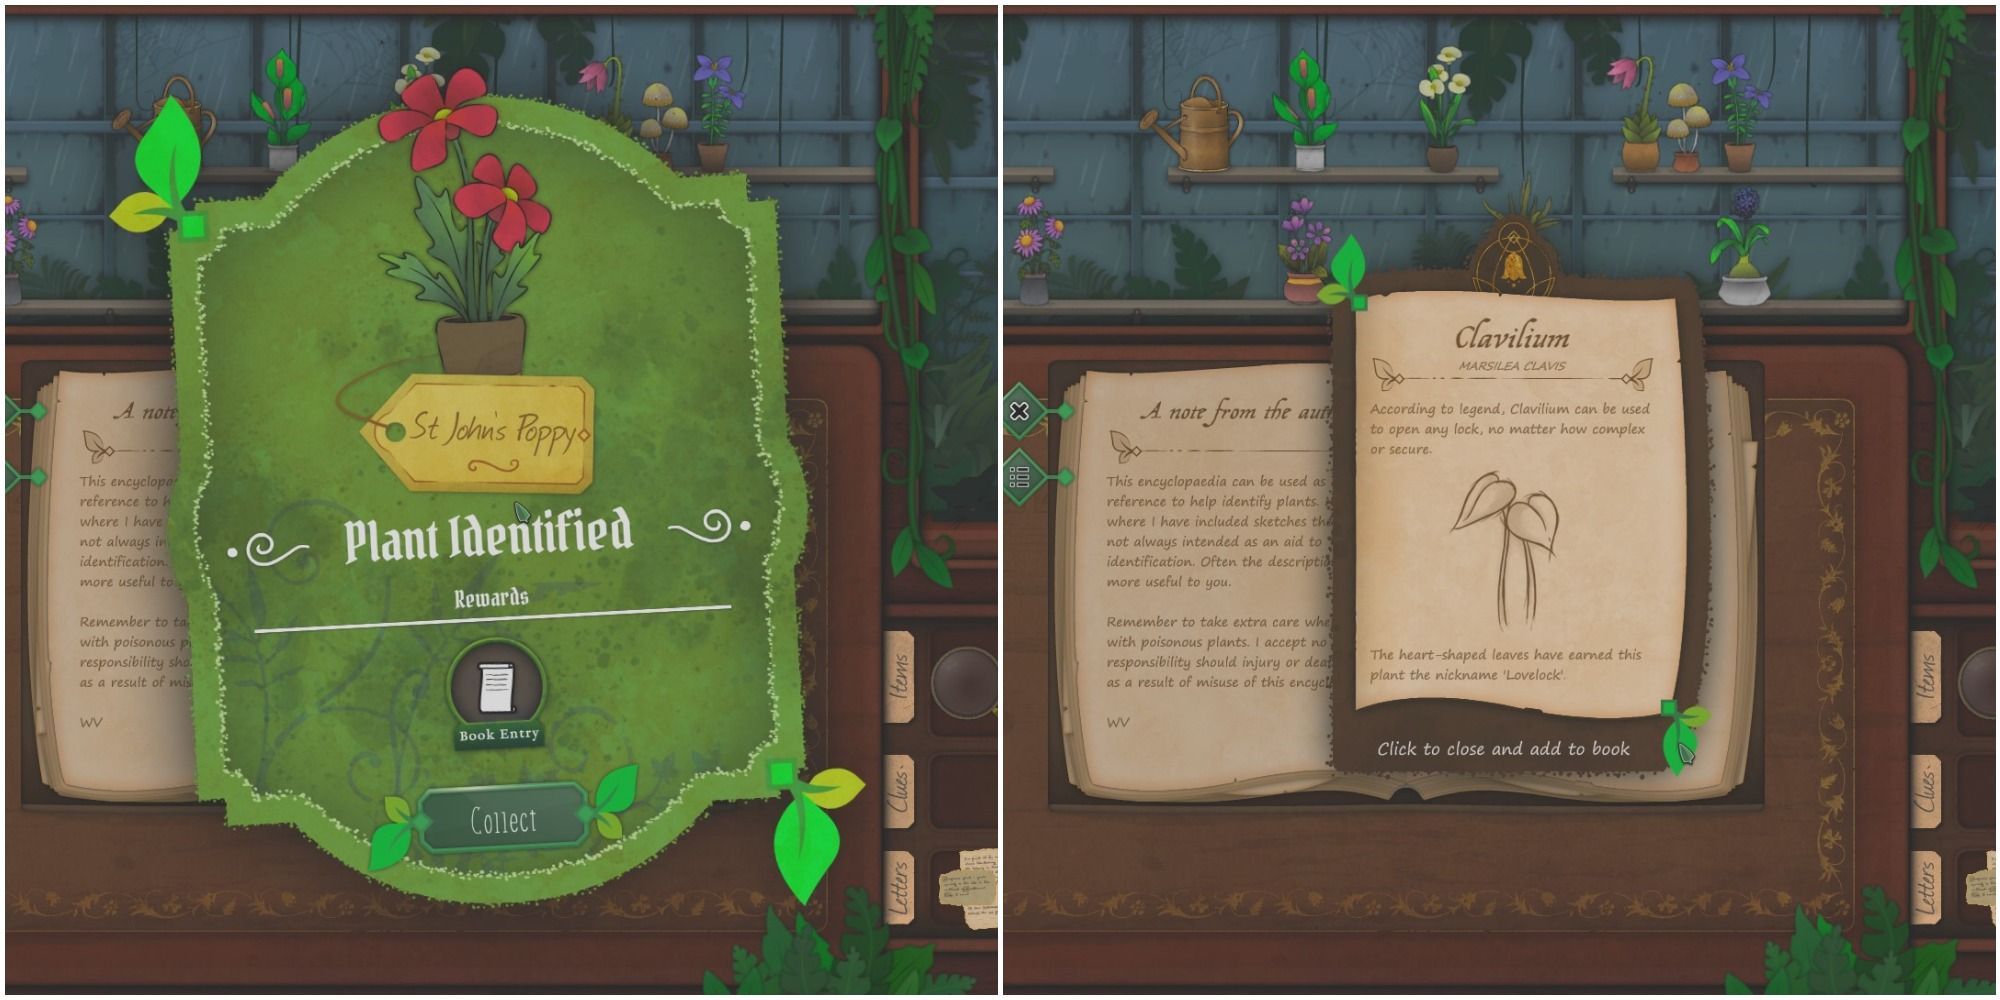 A split image from left to right: a red plant identified, and a new plant entry for the book with a illustration of a leaf